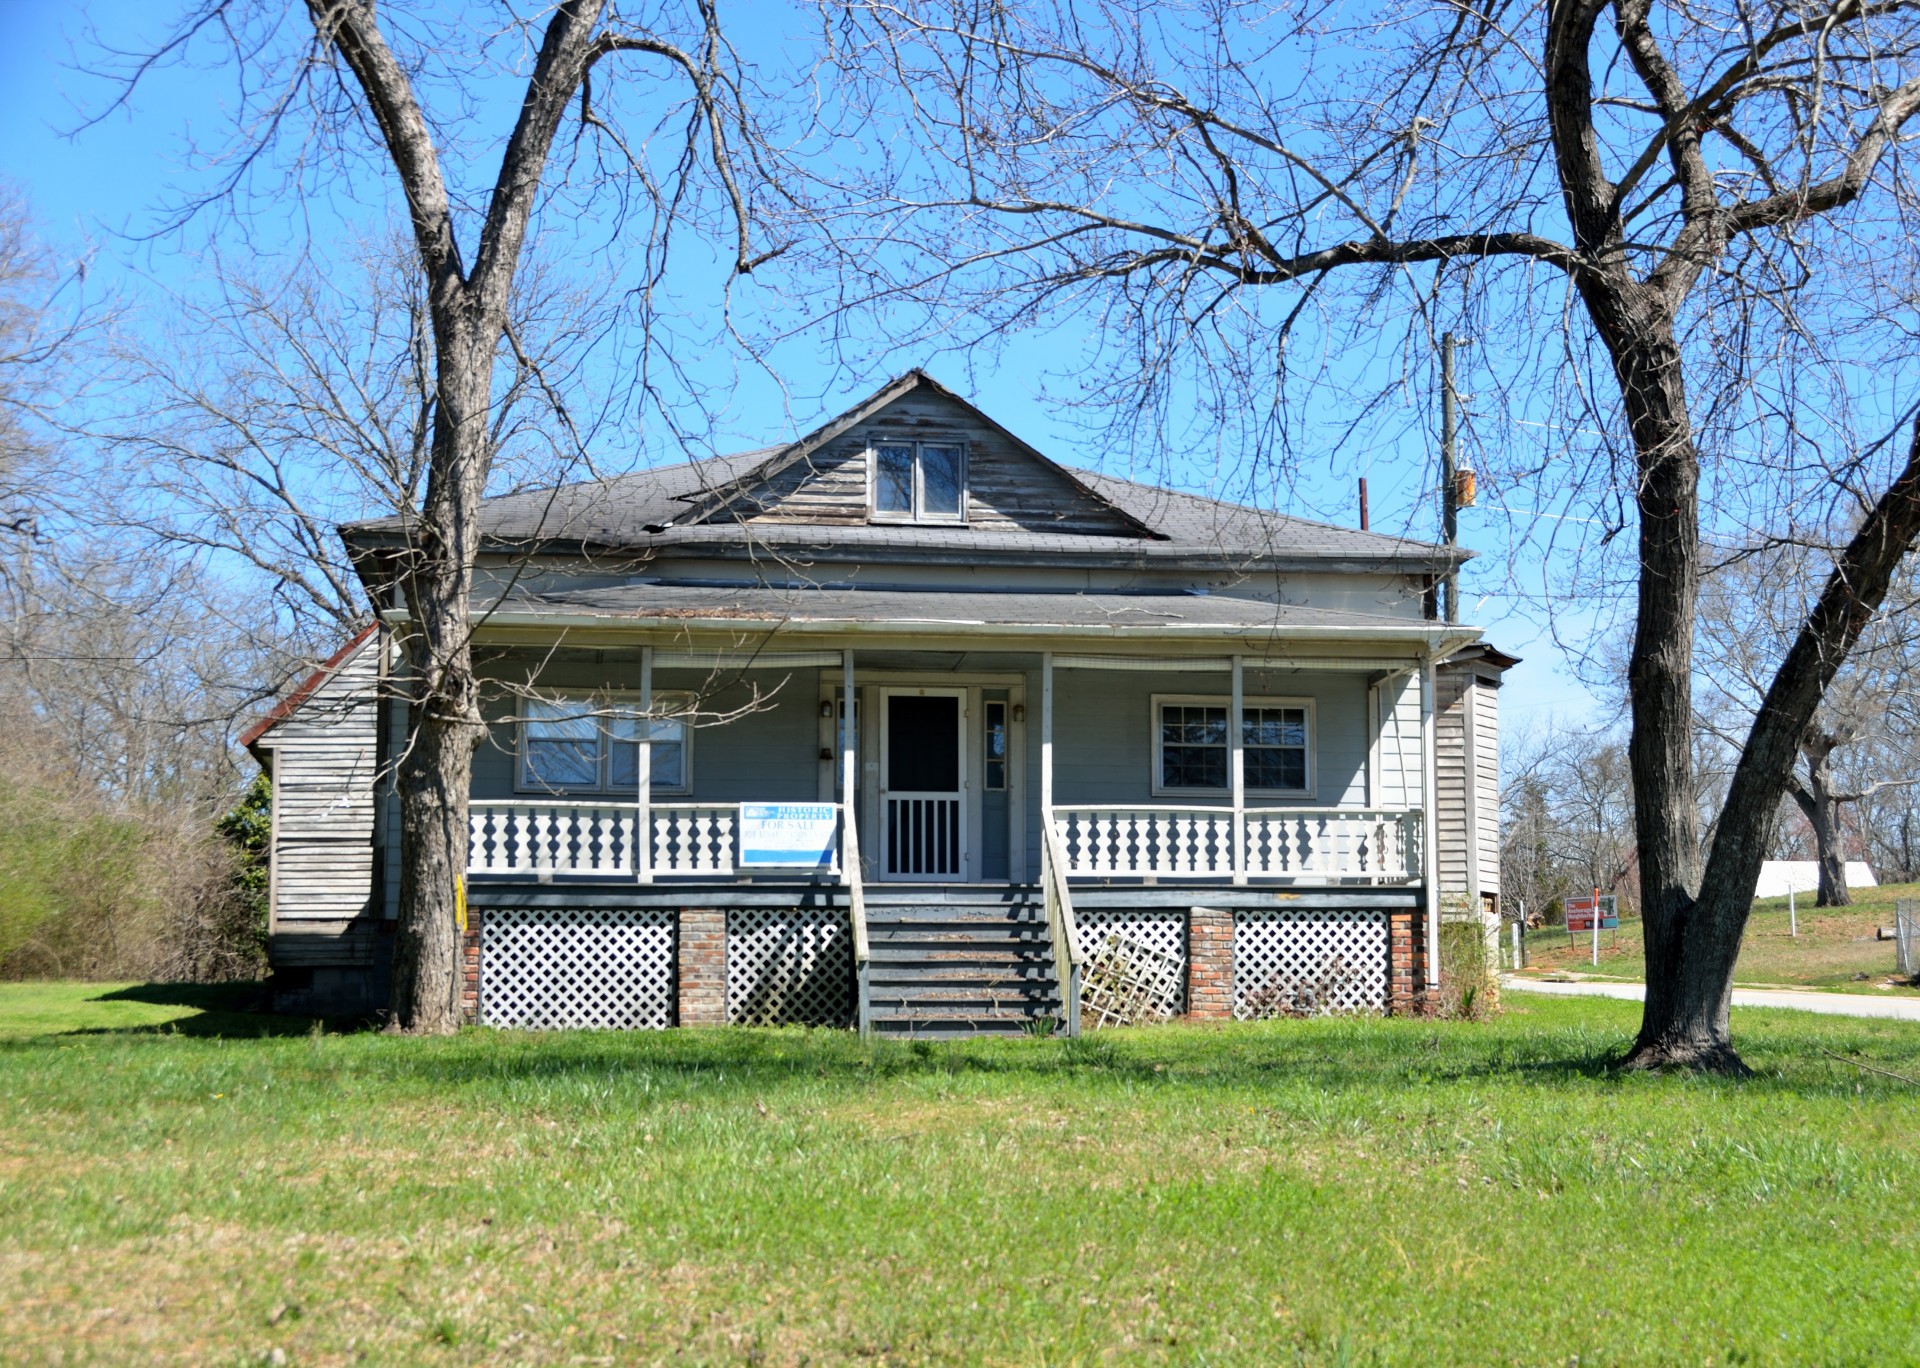 Old house for sale Columbia,tn